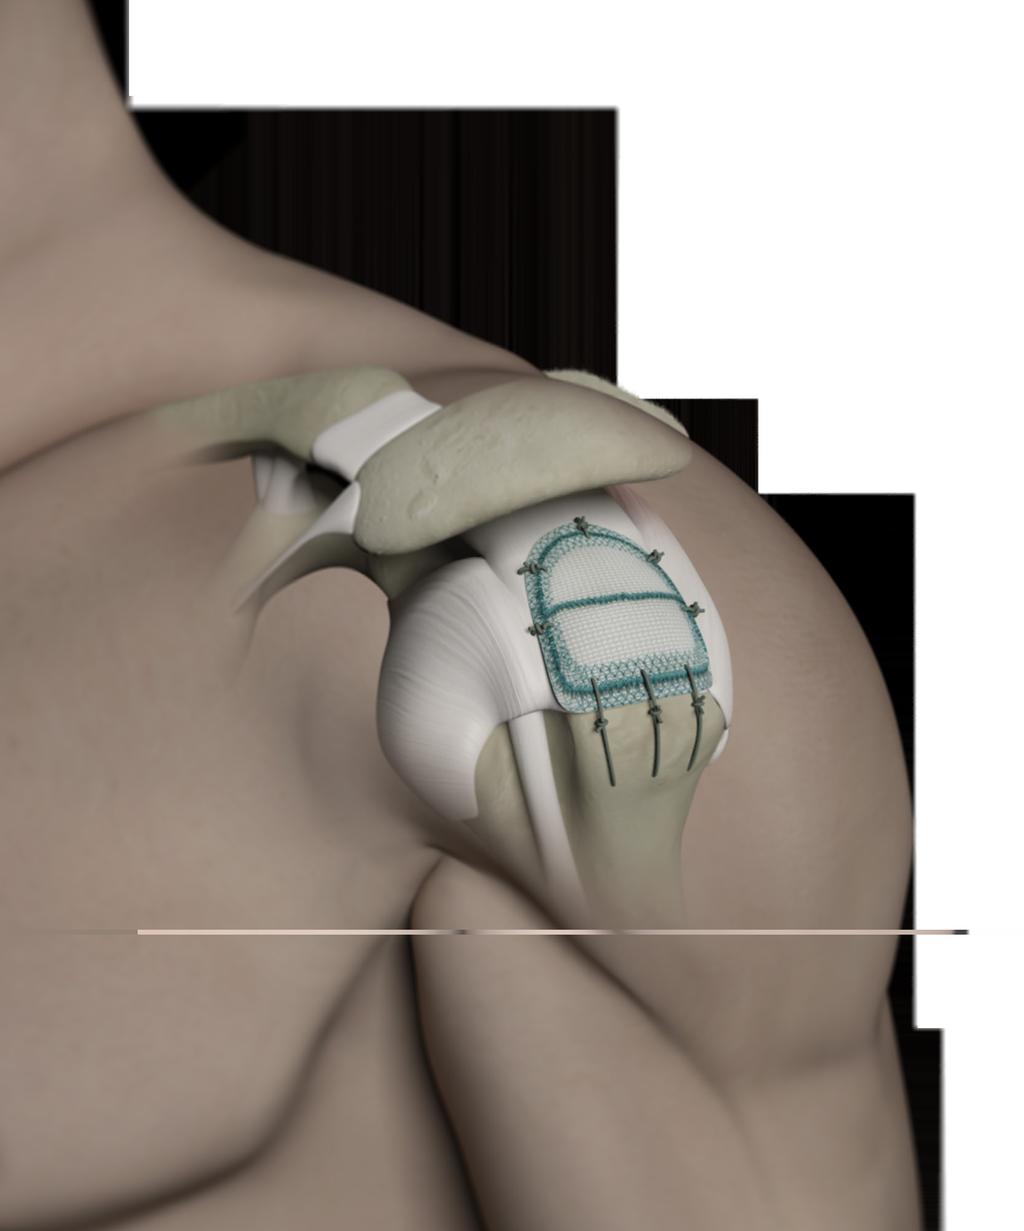 INDICATIONS The Leeds-Kuff Patch is a single use device intended to be used for reinforcement of the rotator cuff following or during repair by suture or suture anchors, where one or more of the